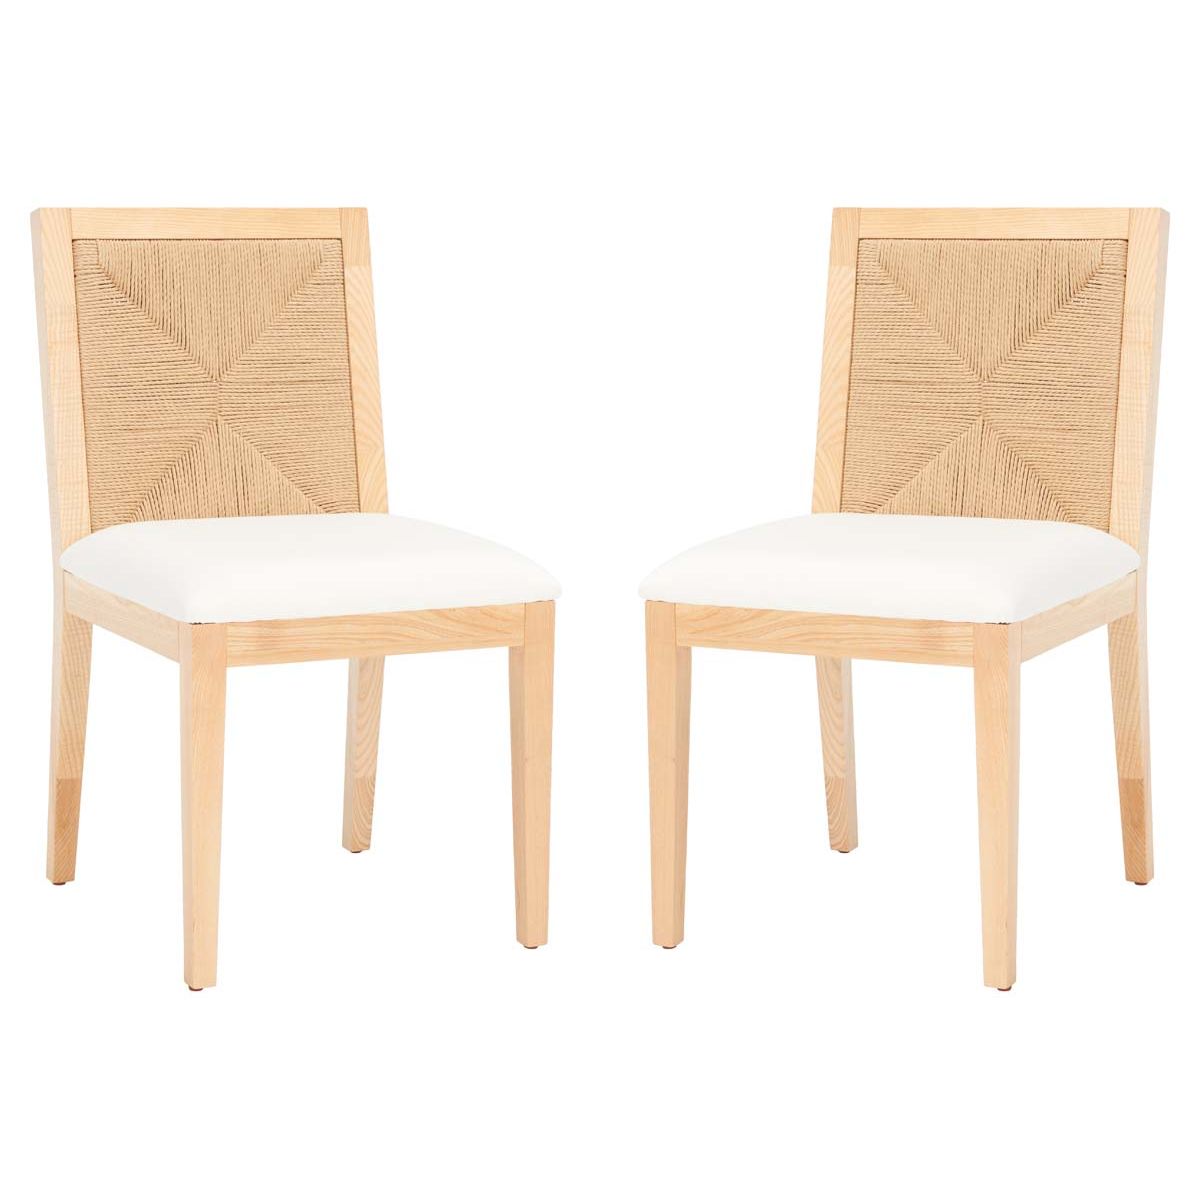 Safavieh Couture Emilio Woven Dining Chair